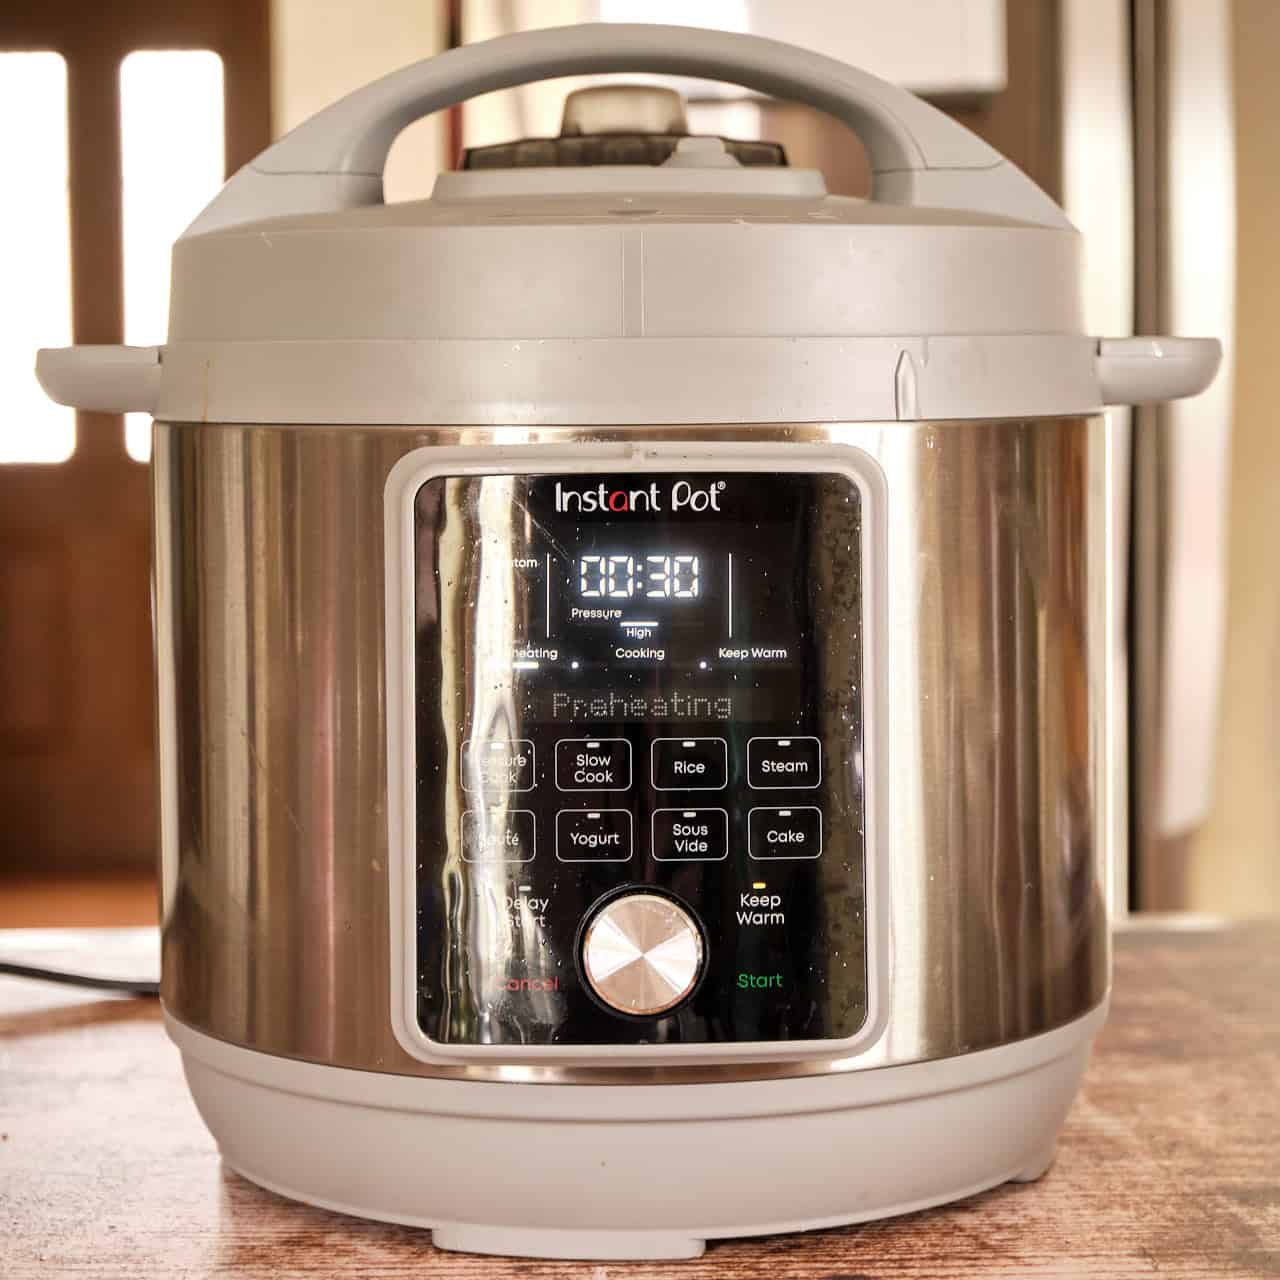 An Instant Pot set to pressure cook for 30 minutes at high pressure